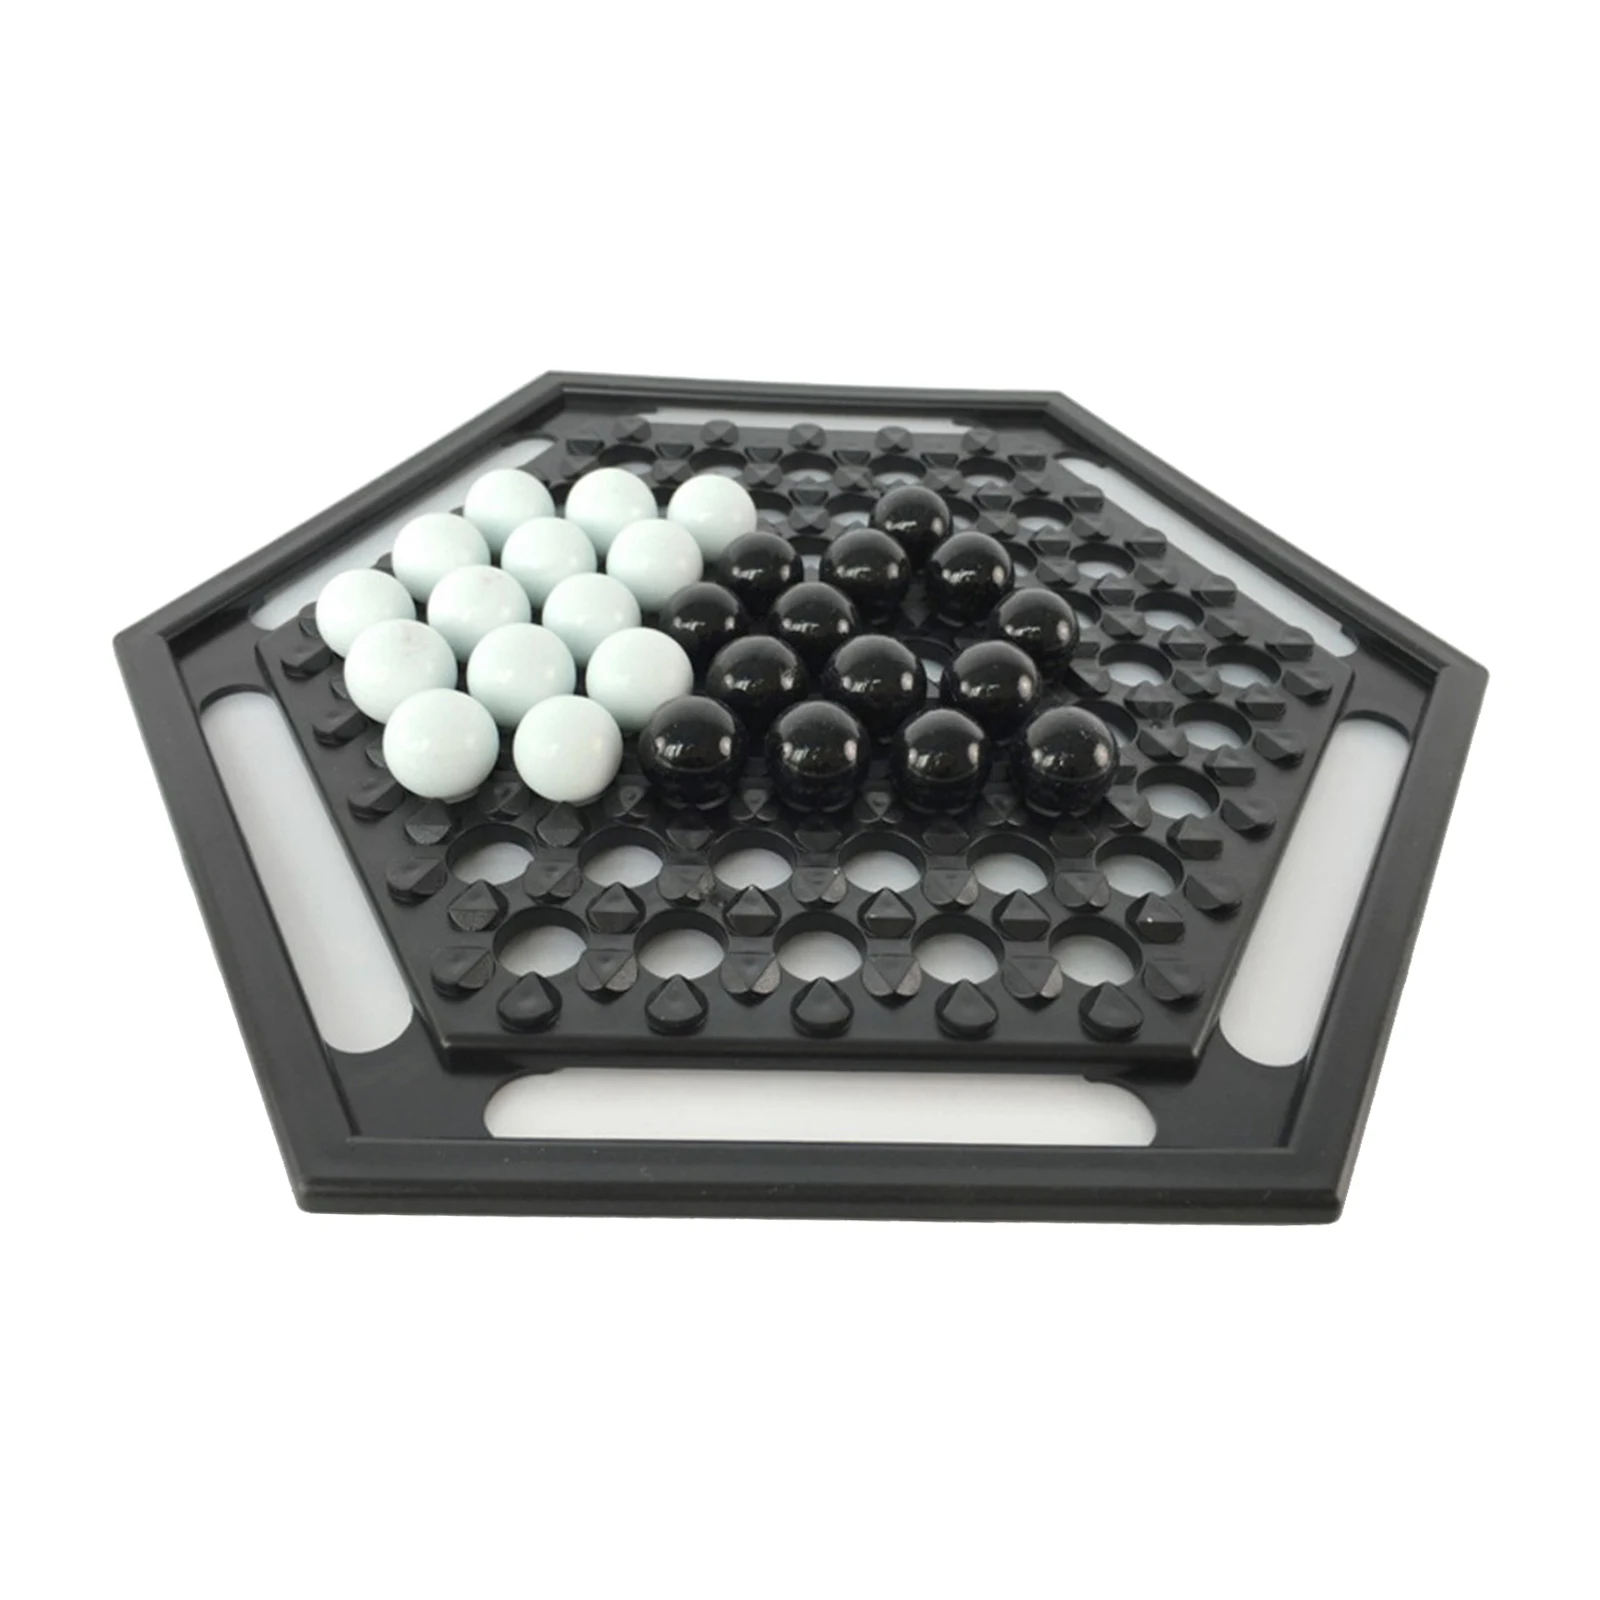 Porcelain and Plastic Table Games, Educational Chess Set Push Chess Board Game